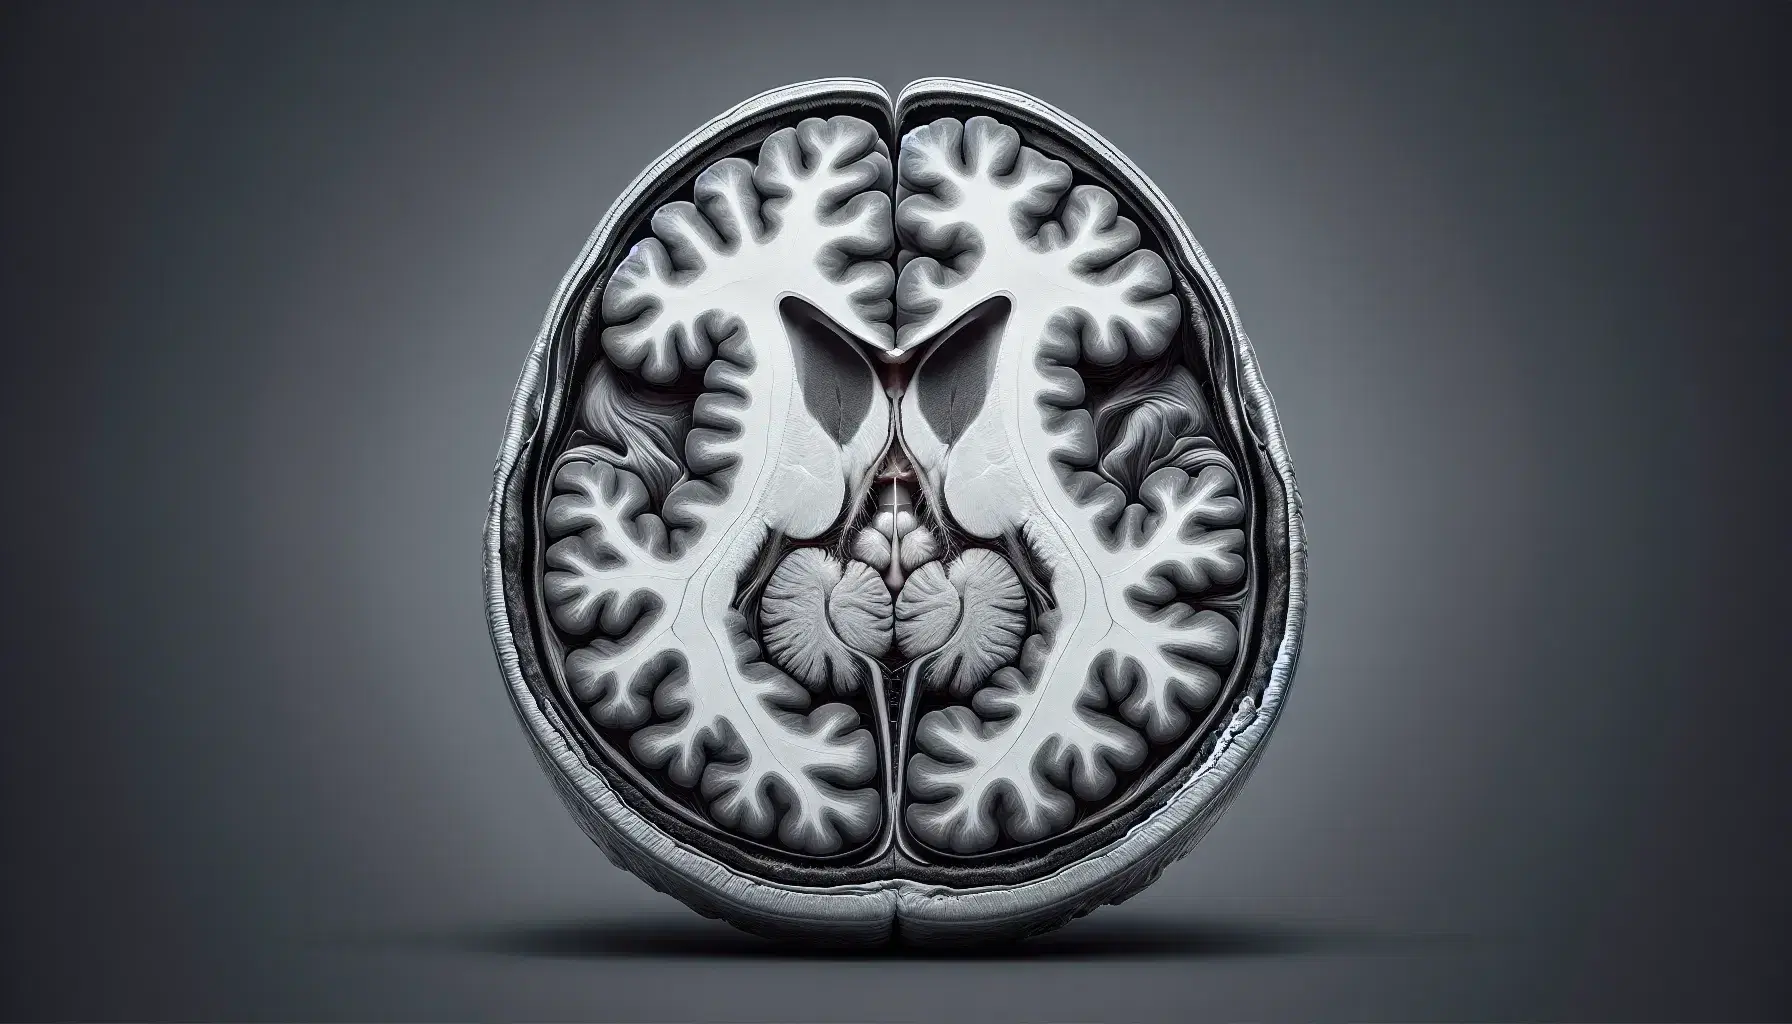 High resolution MRI scan of the human brain in sagittal section, with ventricular system and details of brain structures.